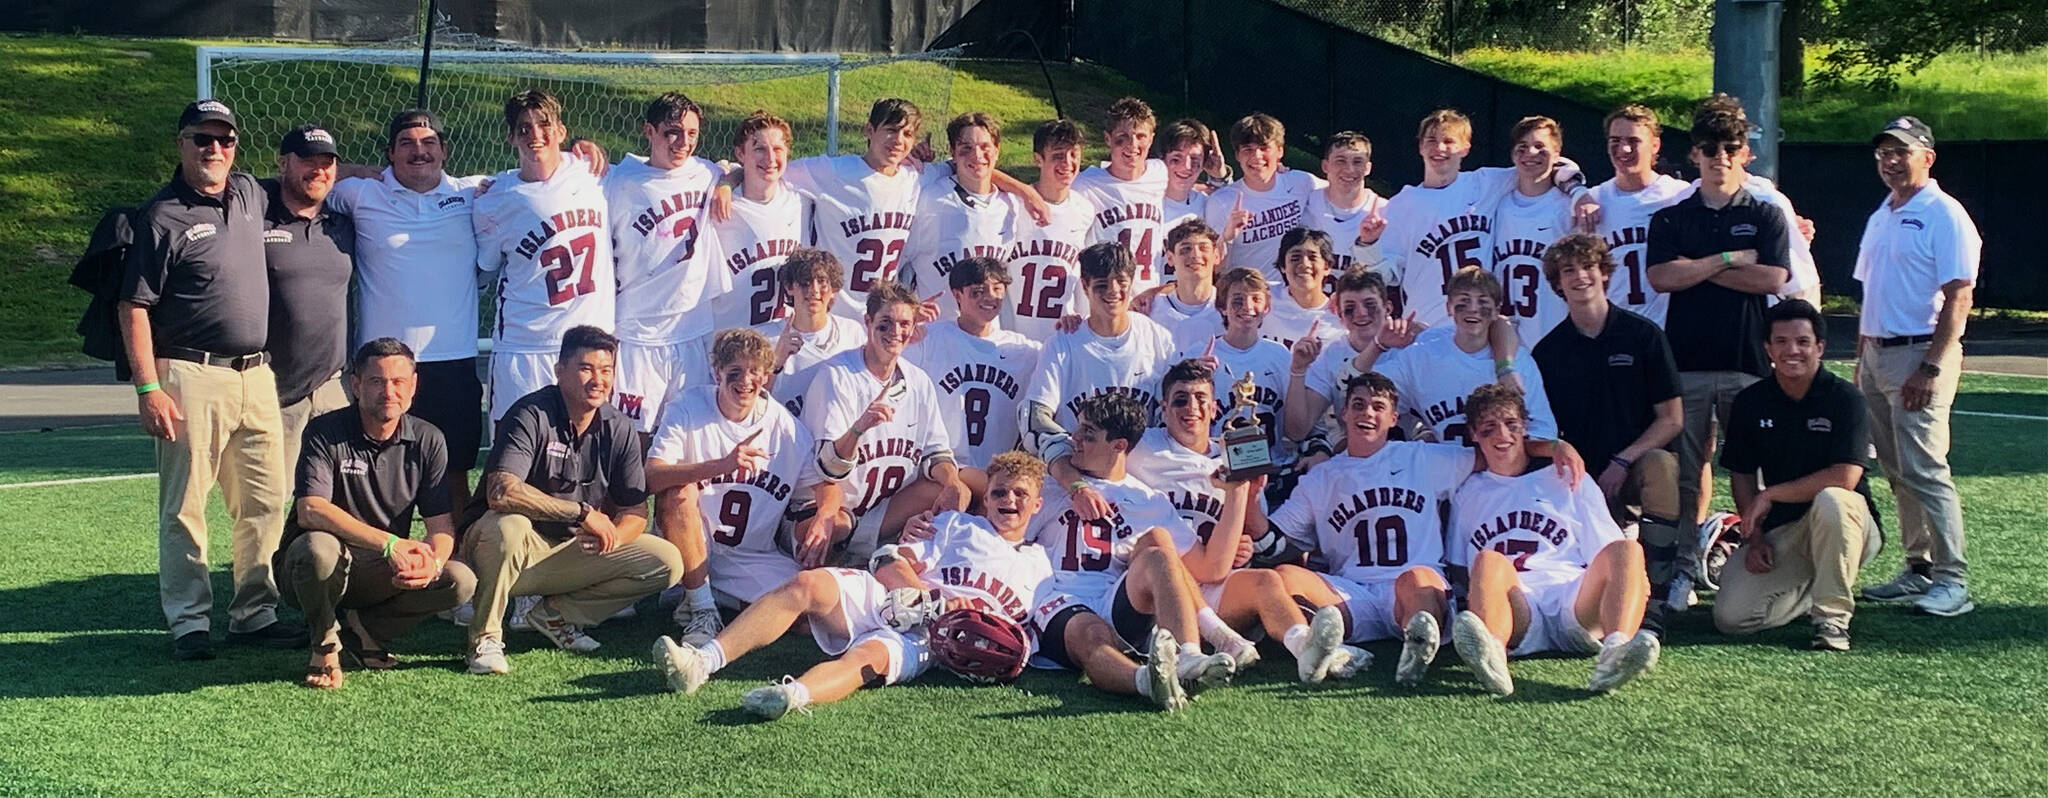 Mercer Island High School’s boys lacrosse team beat Bellevue High School, 11-7, to notch the 3A state championship on May 27 at the Starfire Sports Complex in Tukwila. Photo courtesy of the Mercer Island School District